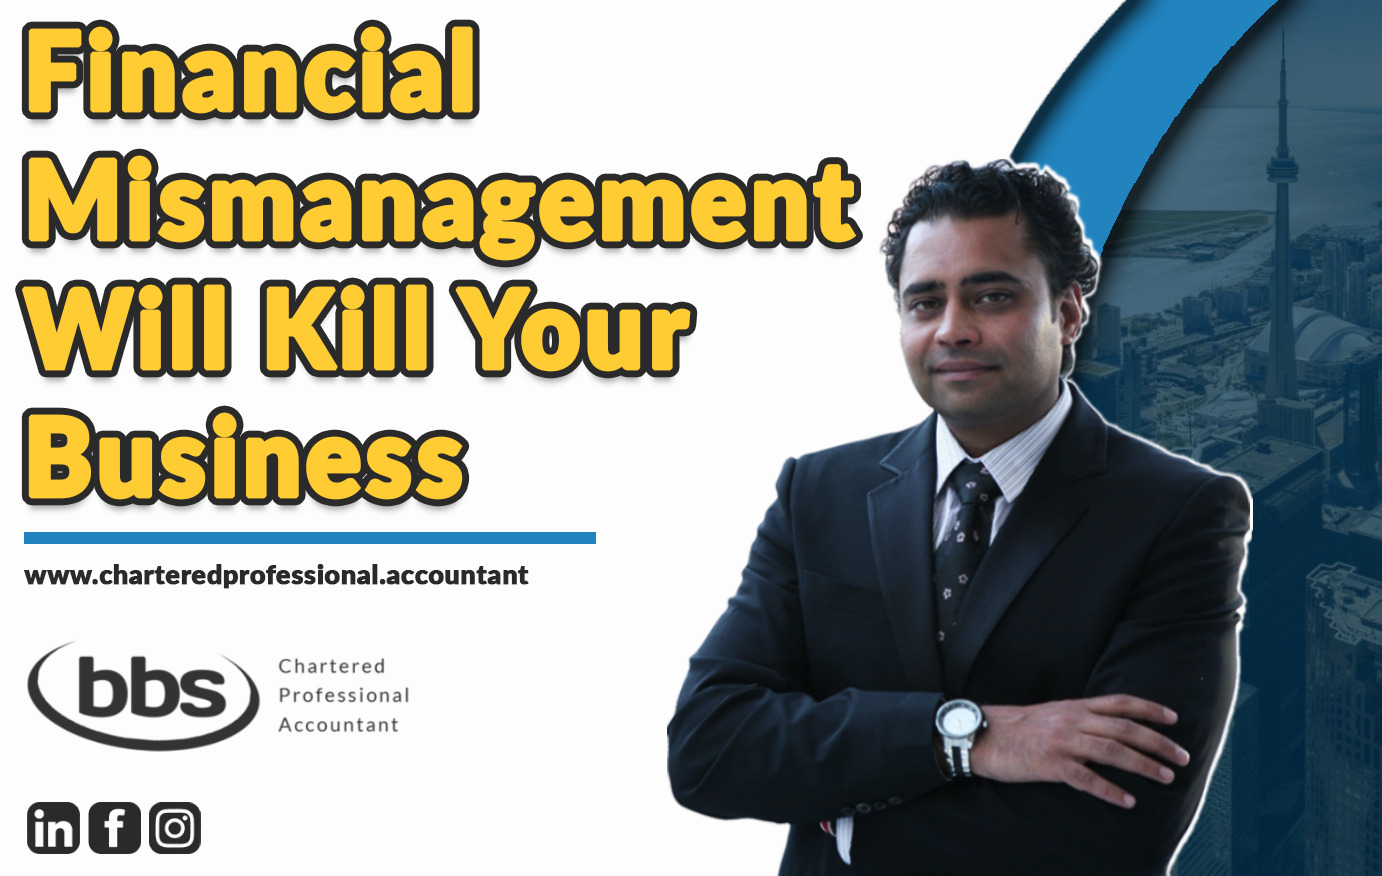 5 Ways Financial Mismanagement Will Kill Your Business